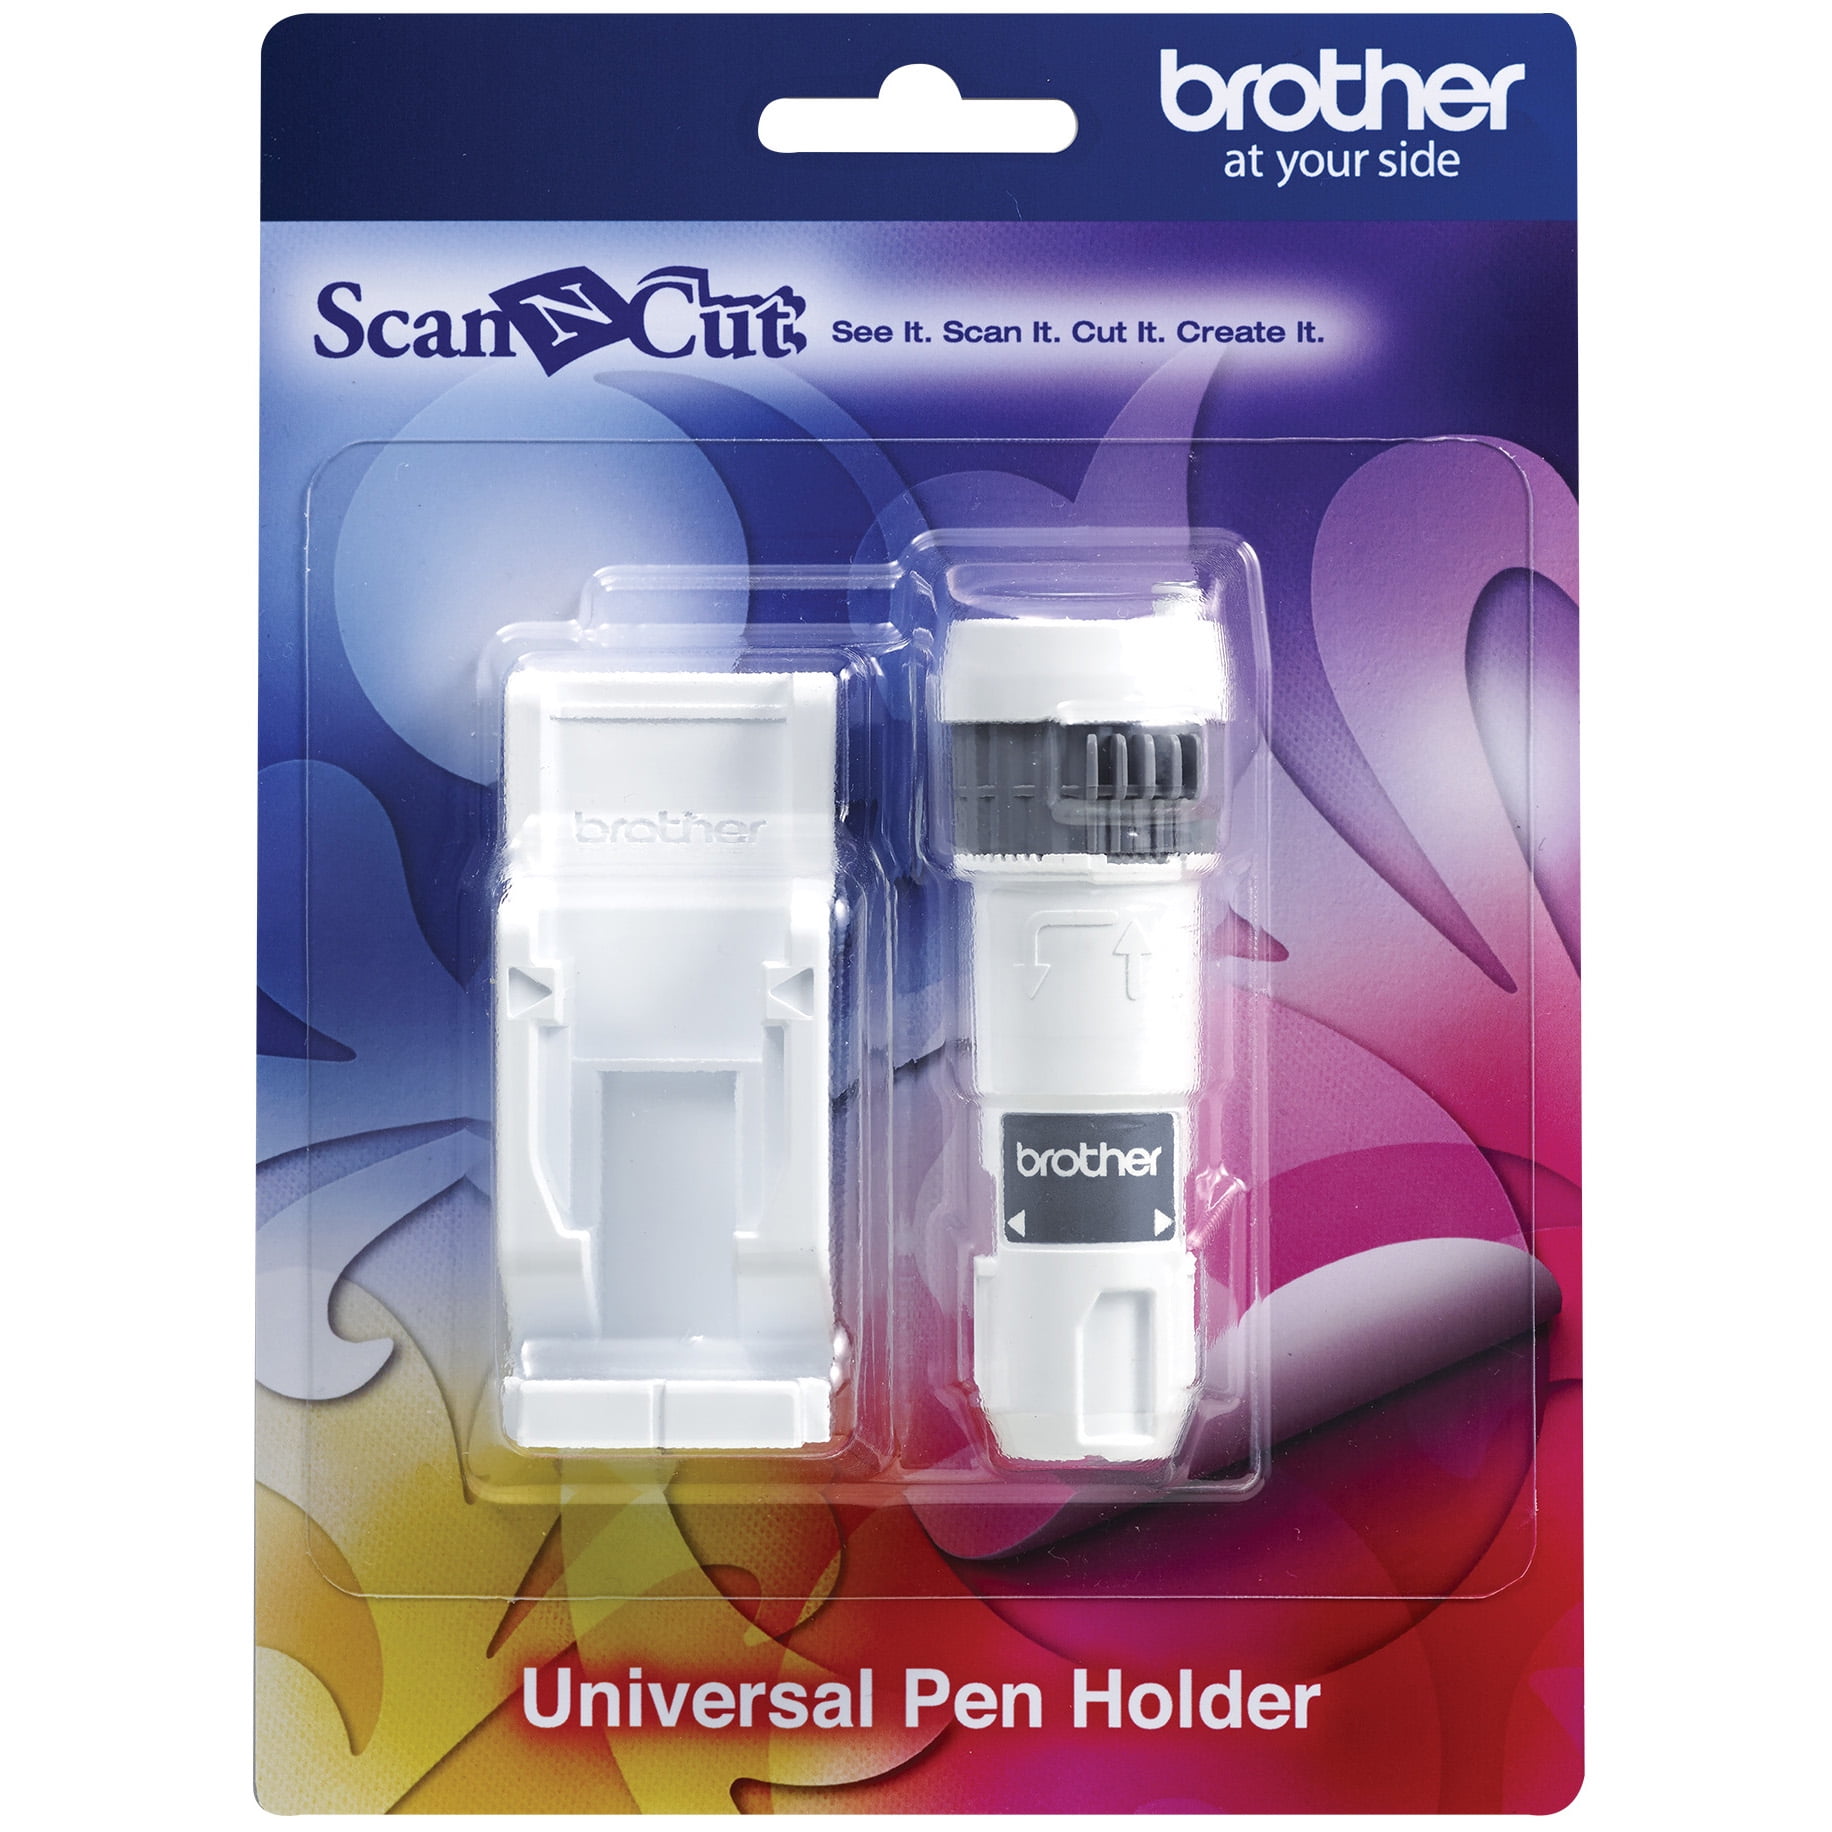 UNIVERSAL PEN ADAPTER Fits Cricut Joy, Draw With Any Pen or Pencil 